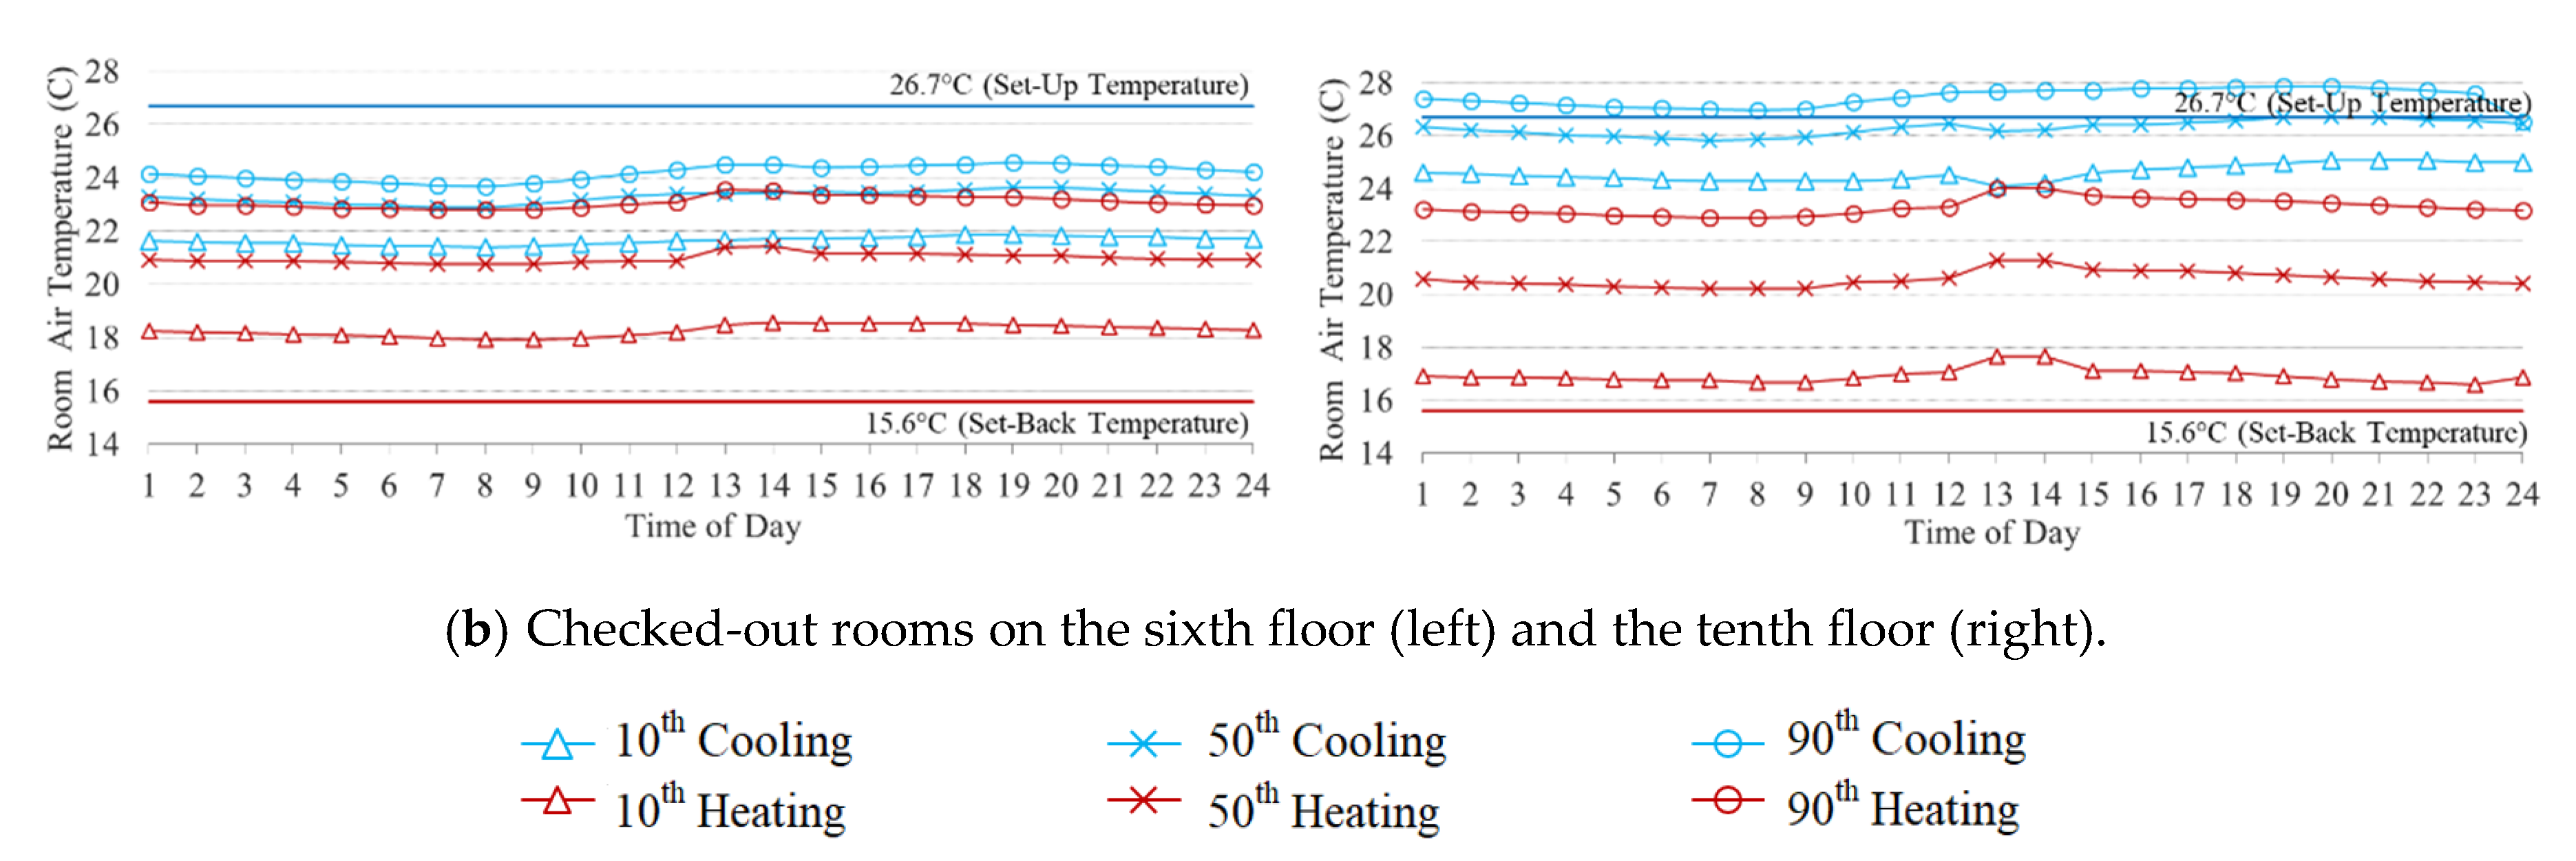 What is the Average Room Temperature?